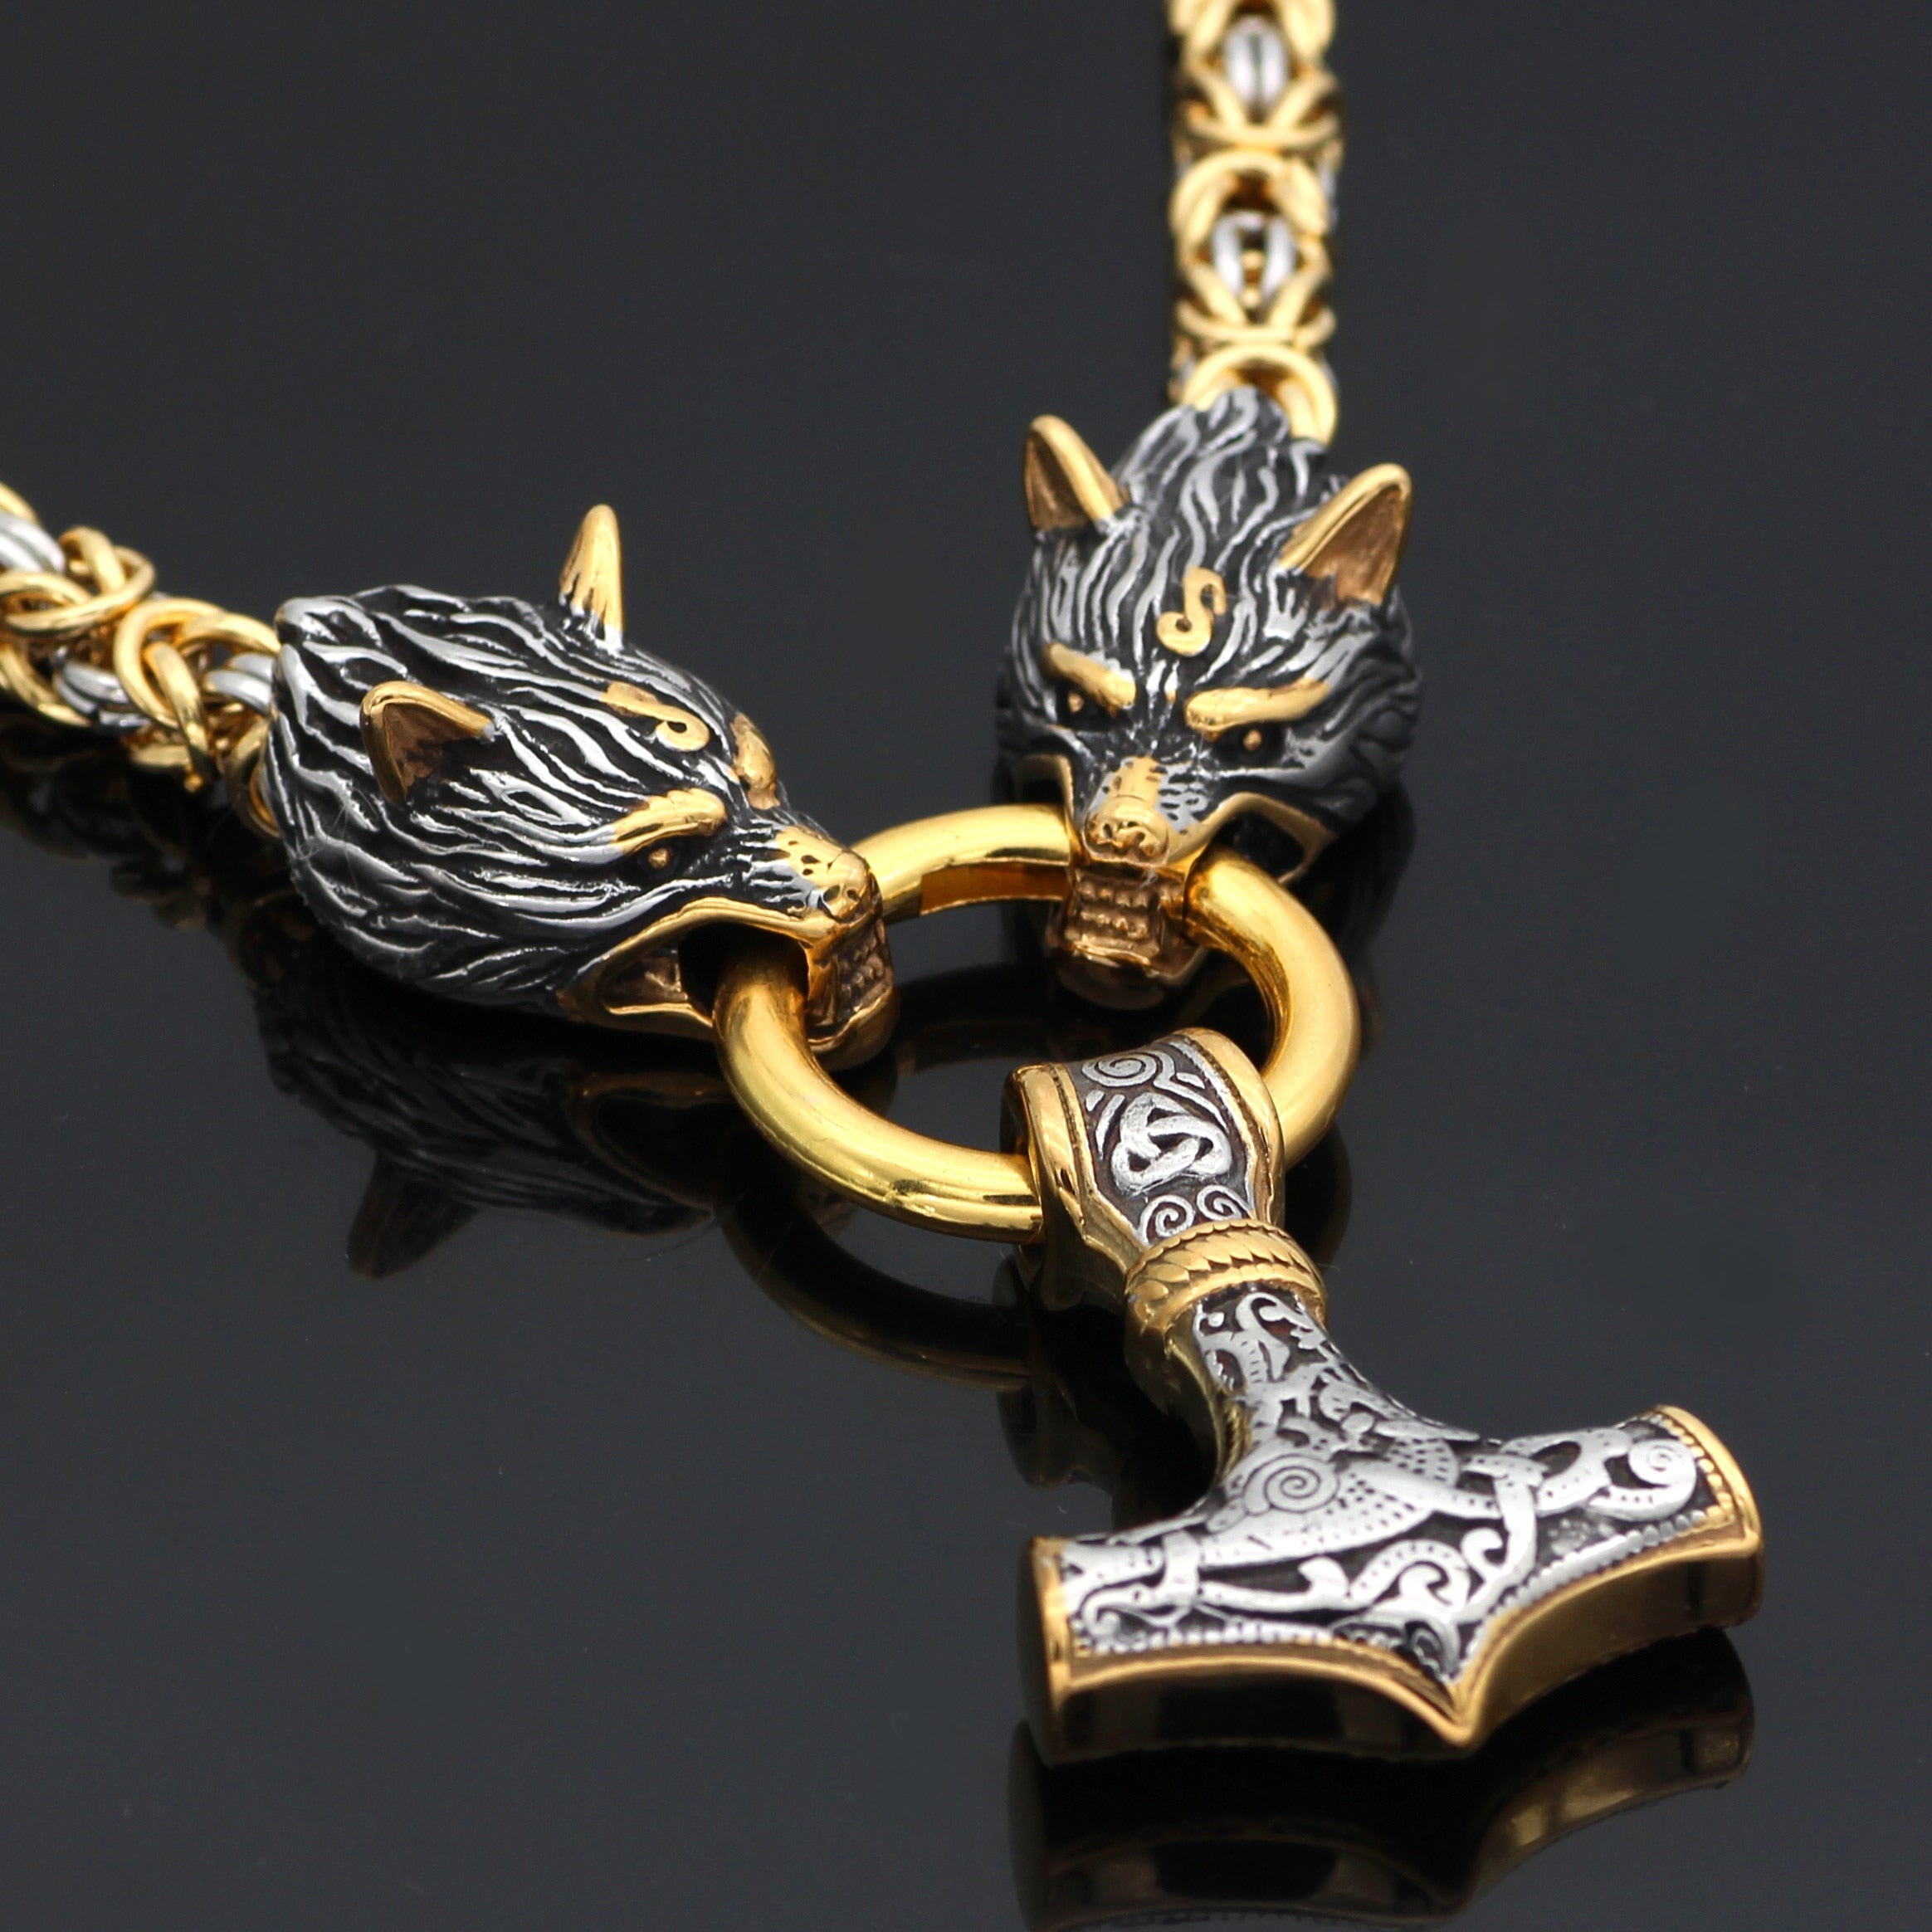 Men stainless steel Wolf head norse viking amulet thor hammer pendant necklace viking king chain